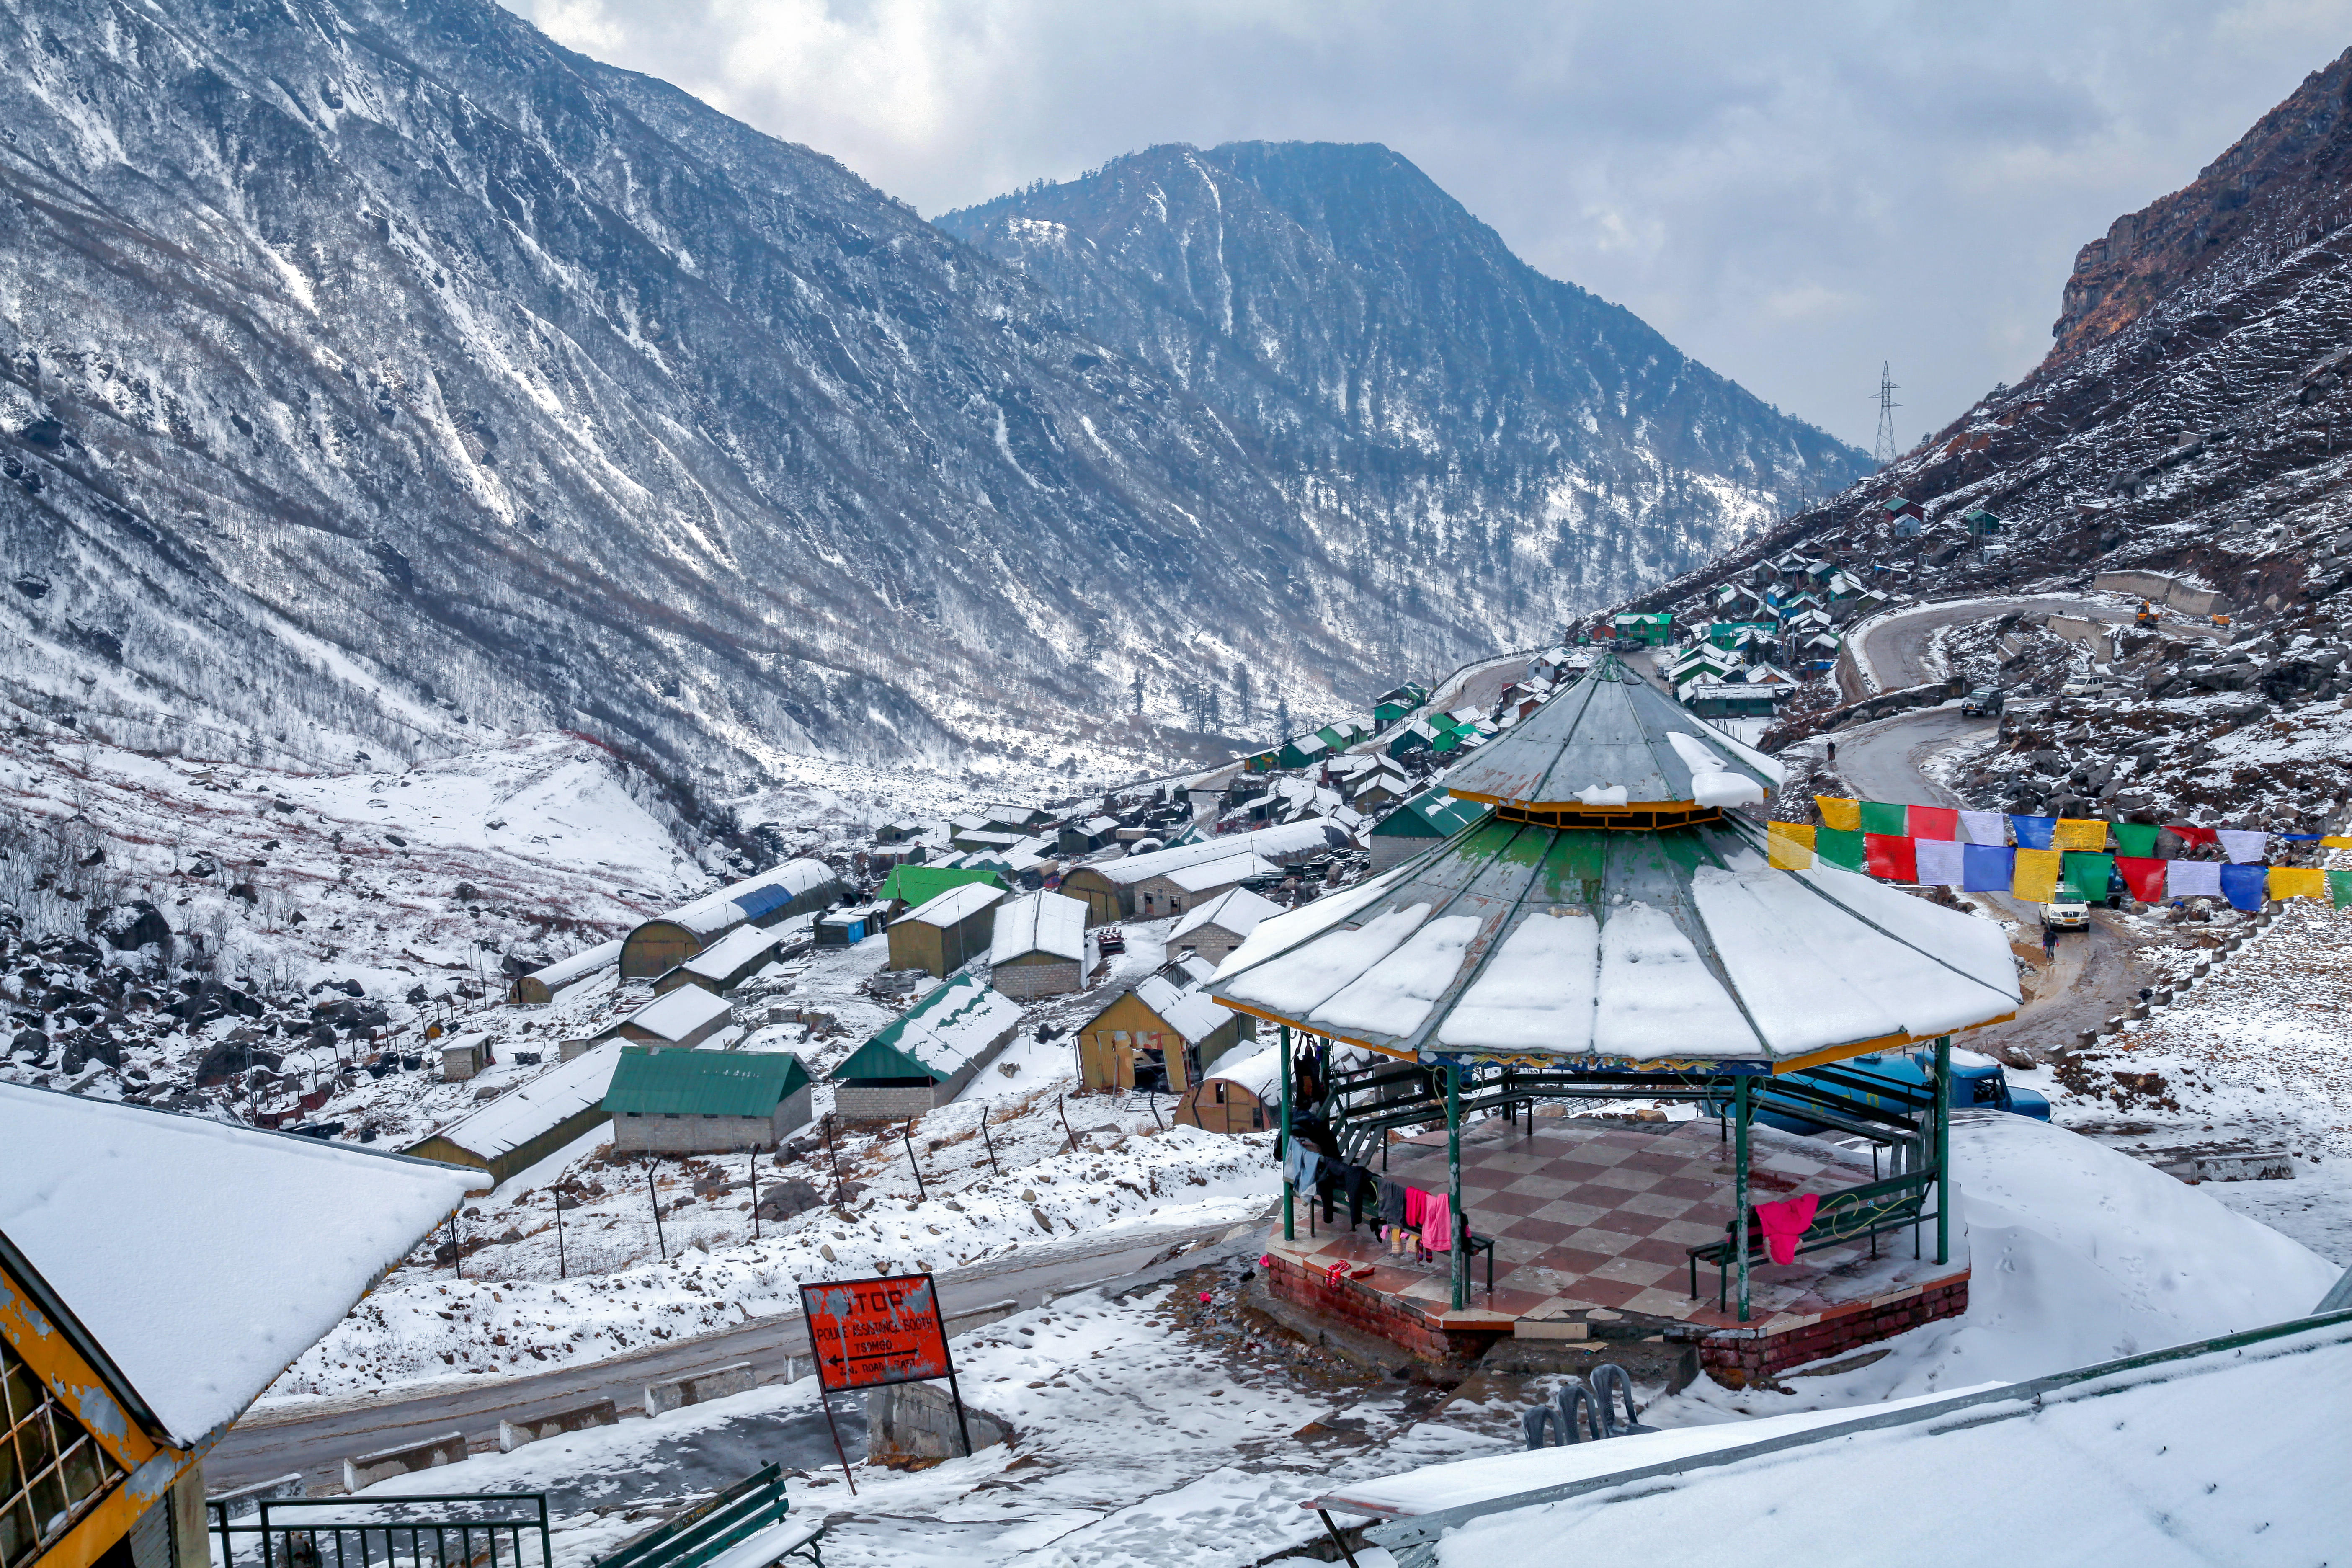 Immerse yourself in the serene beauty of Gangtok's Himalayan mountains and valleys